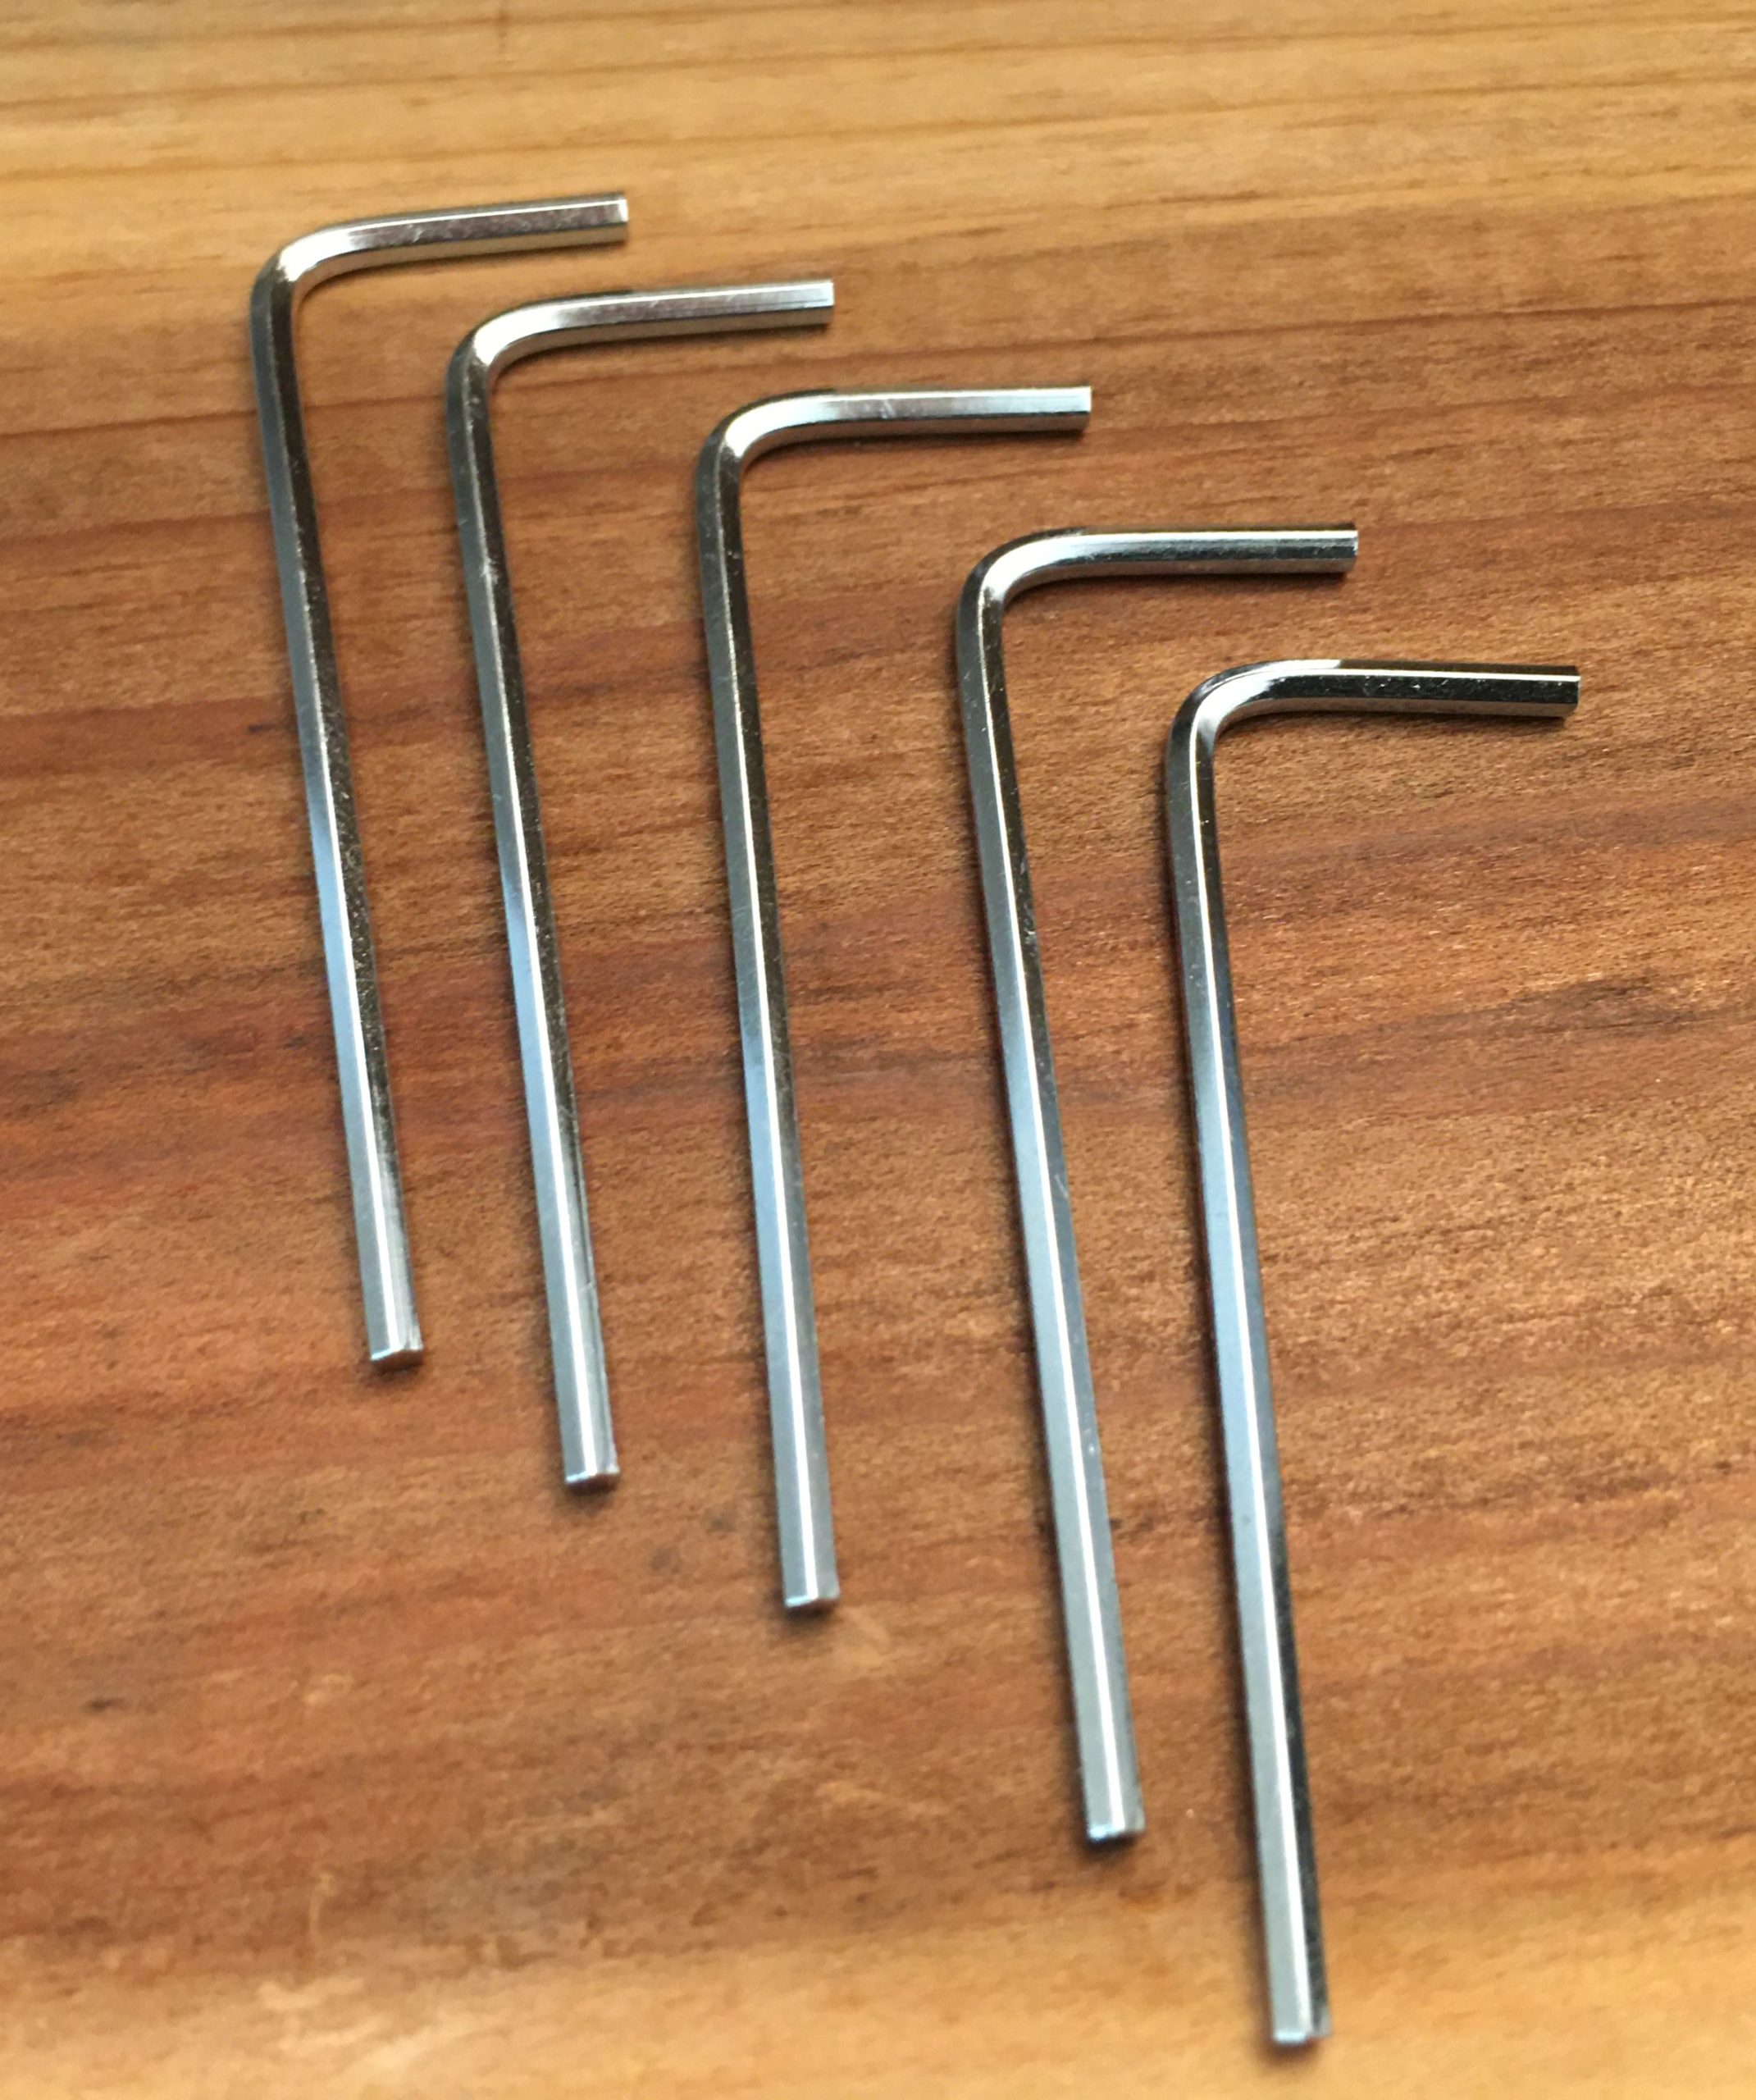 2mm Allen Wrenches